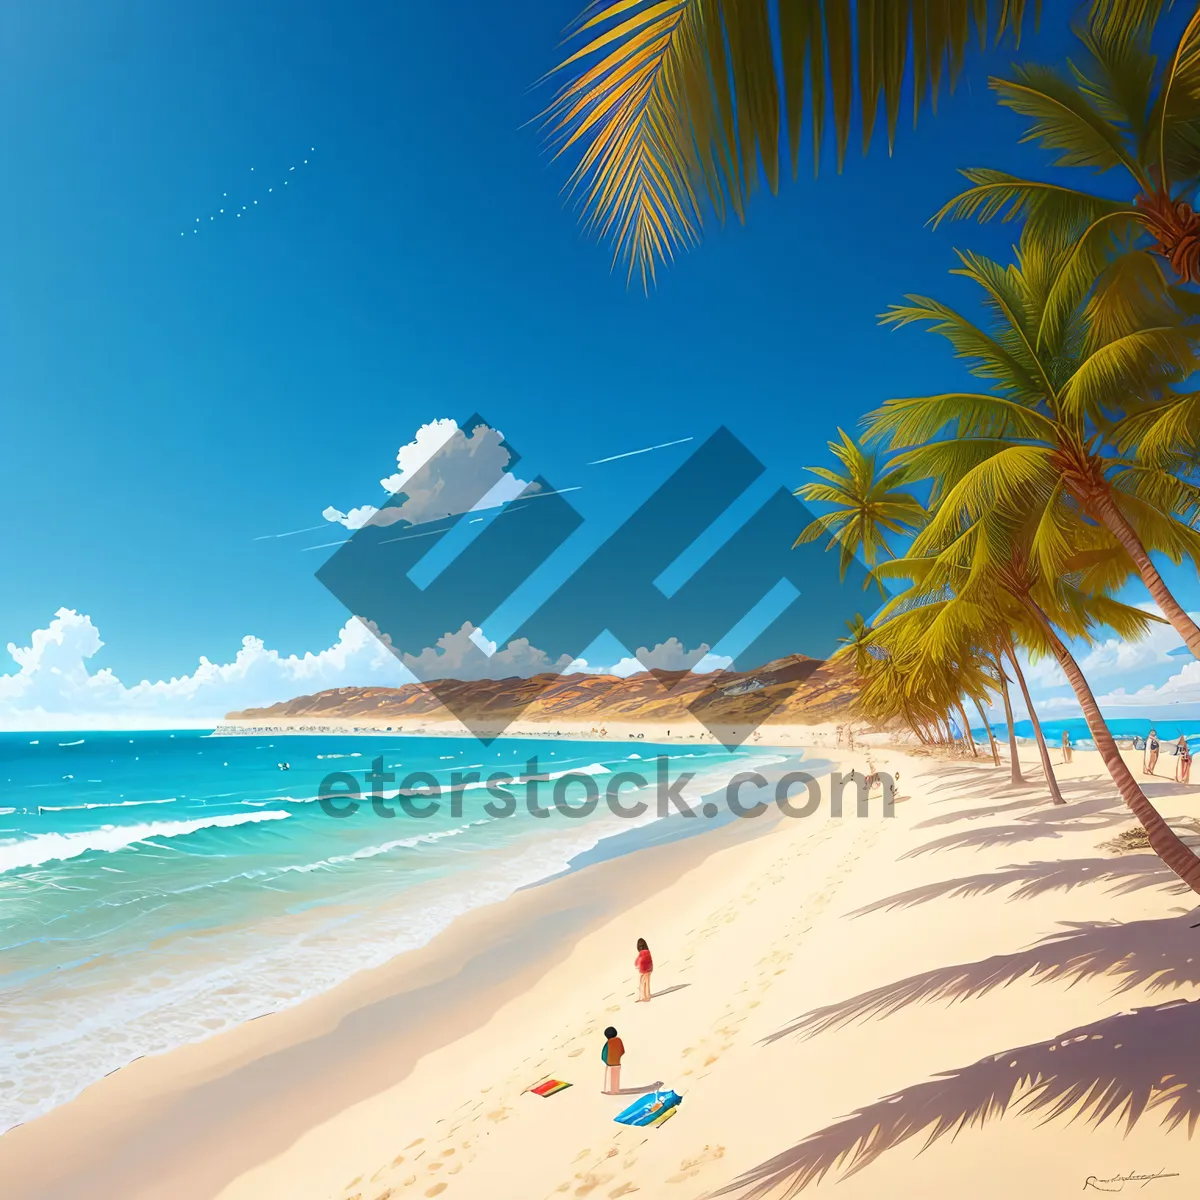 Picture of Turquoise Paradise: Tropical Beach Bliss with Palm Trees